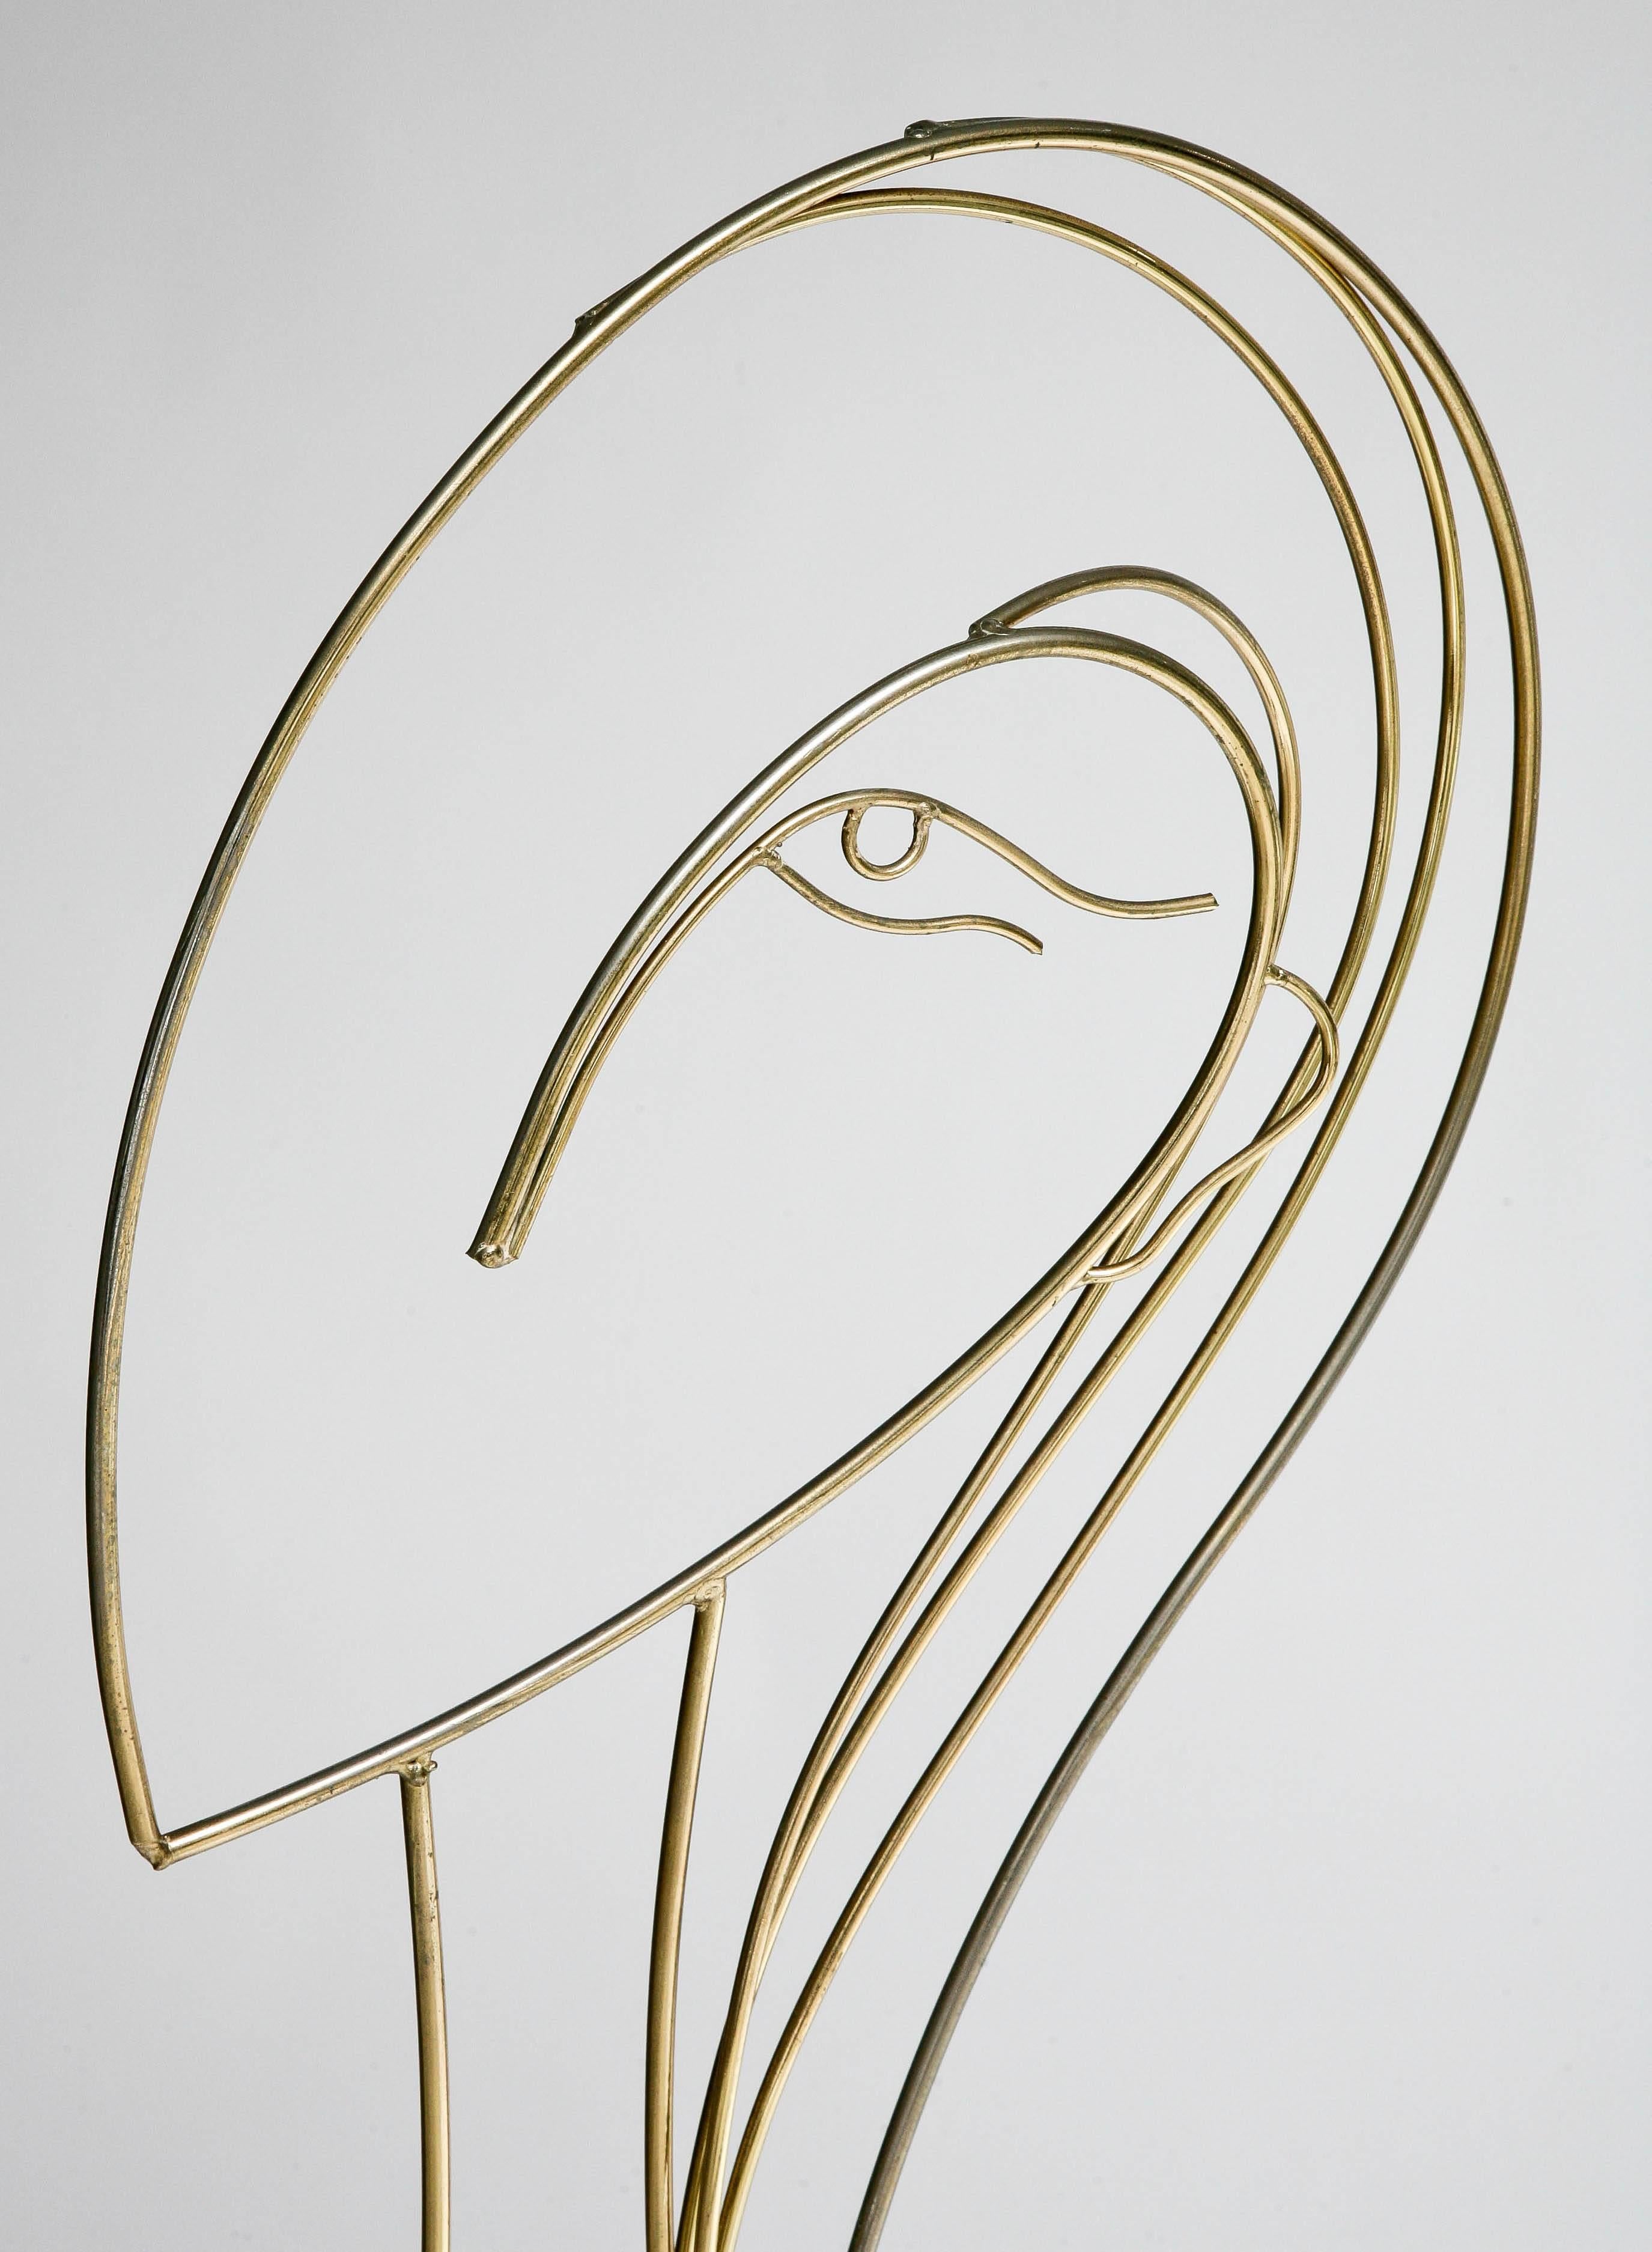 Modern Curtis Jere, Female Face-Silhouette Sculpture in Brass and Steel